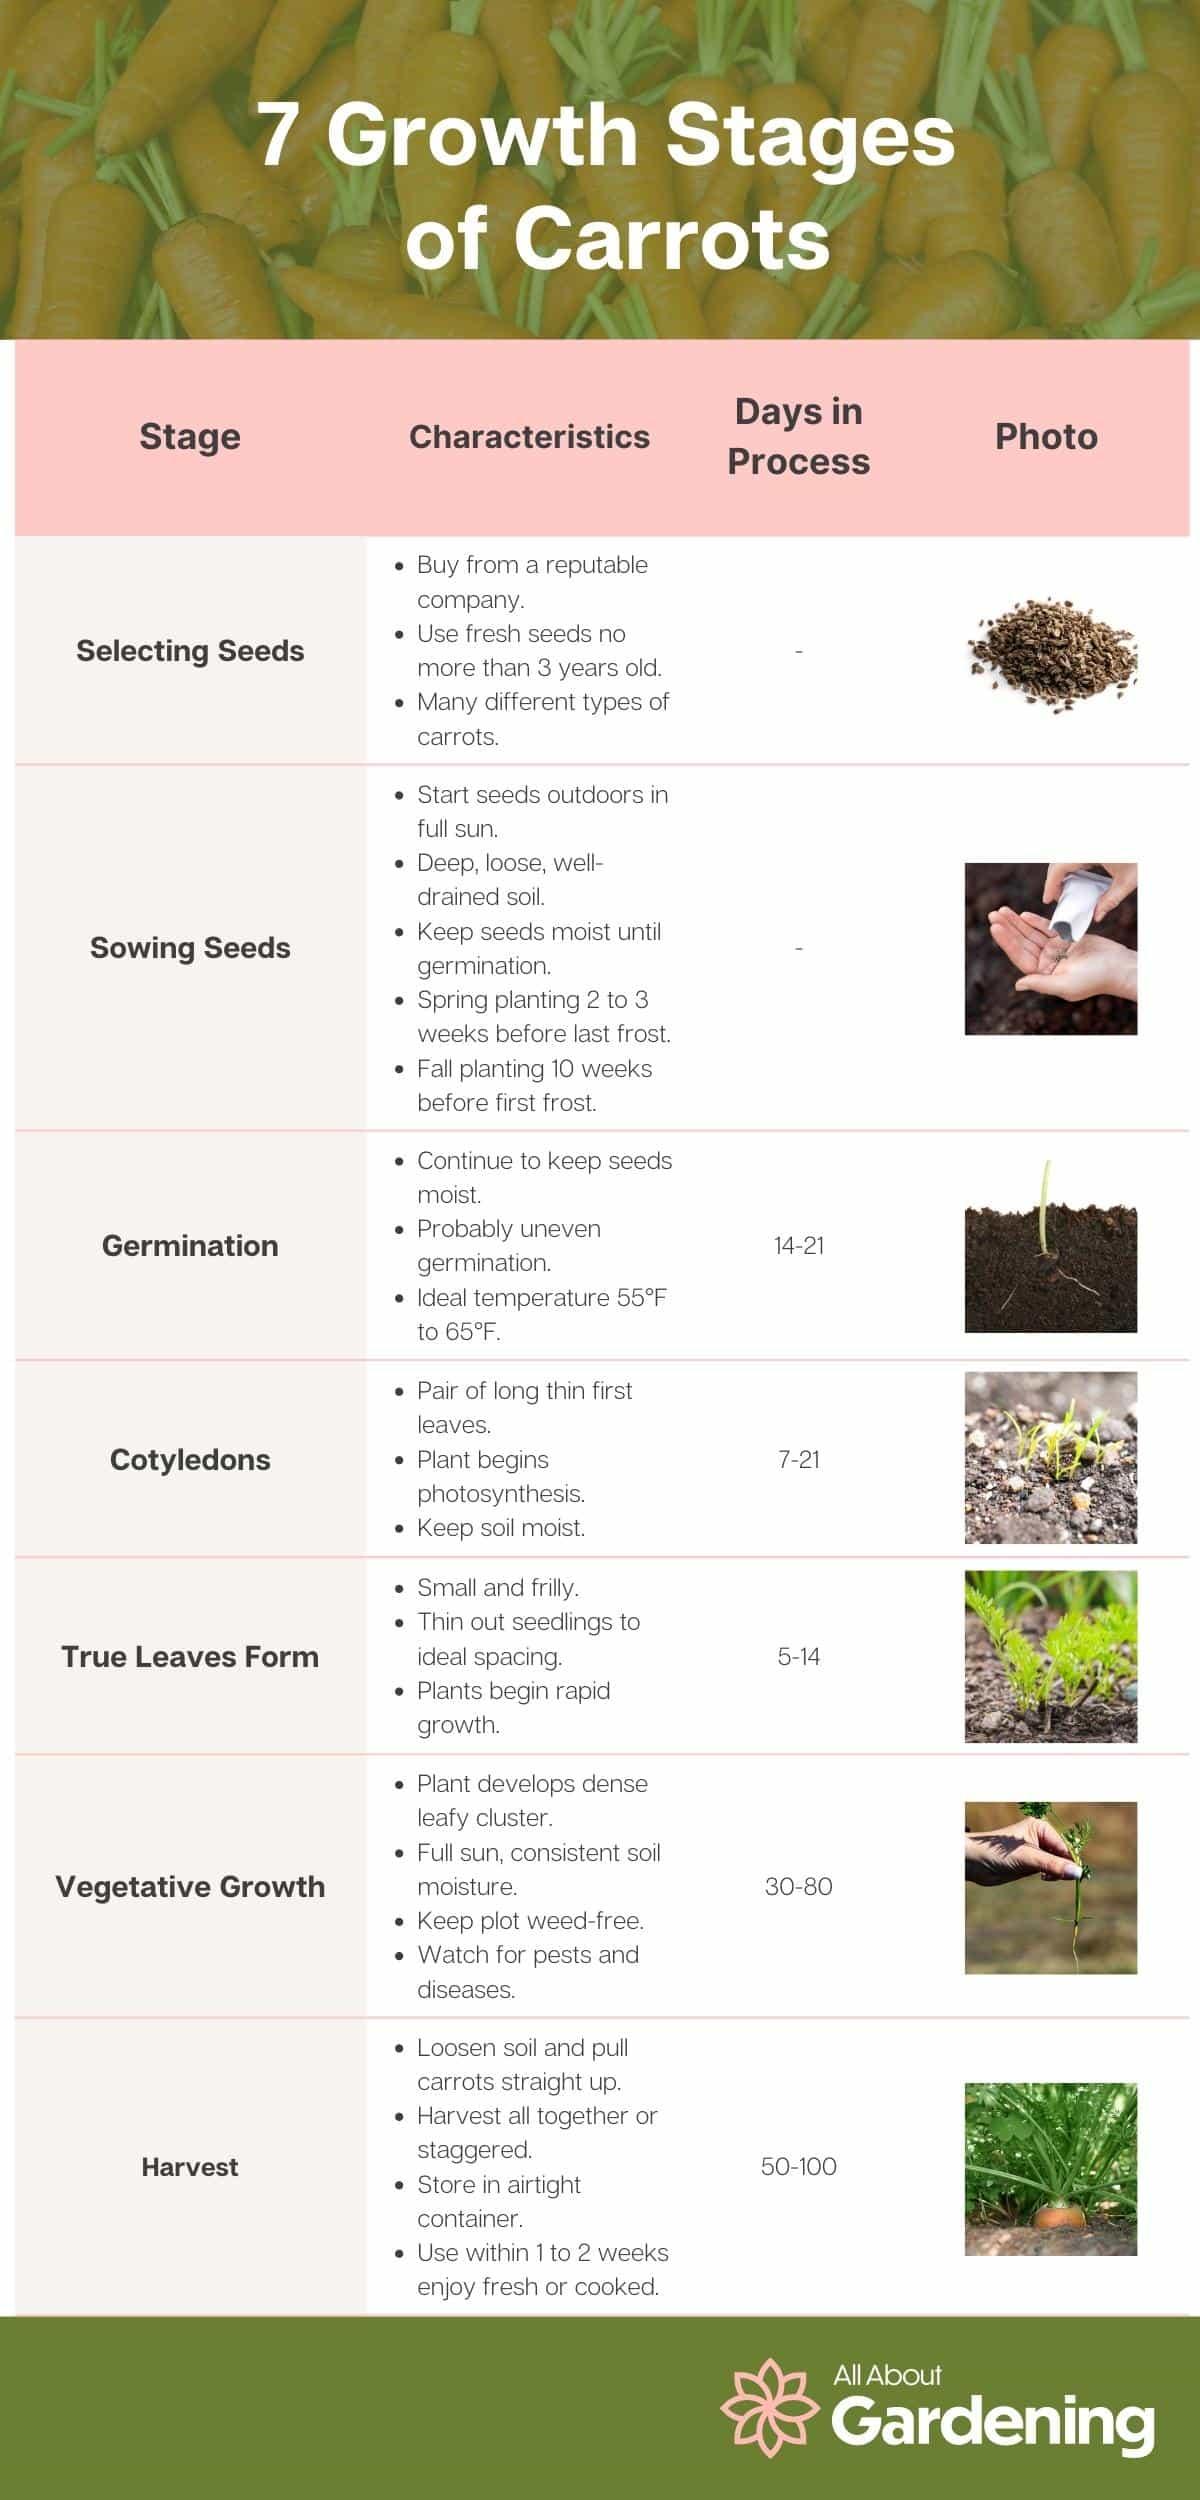 Chart that depicts the seven growth stages of carrots, their characteristics, days in process, and a photo example of each. The growth stages are as follows: selecting seeds, sowing seeds, germination, early growth or cotyledons, true leaves form, vegetative stage, then harvest.